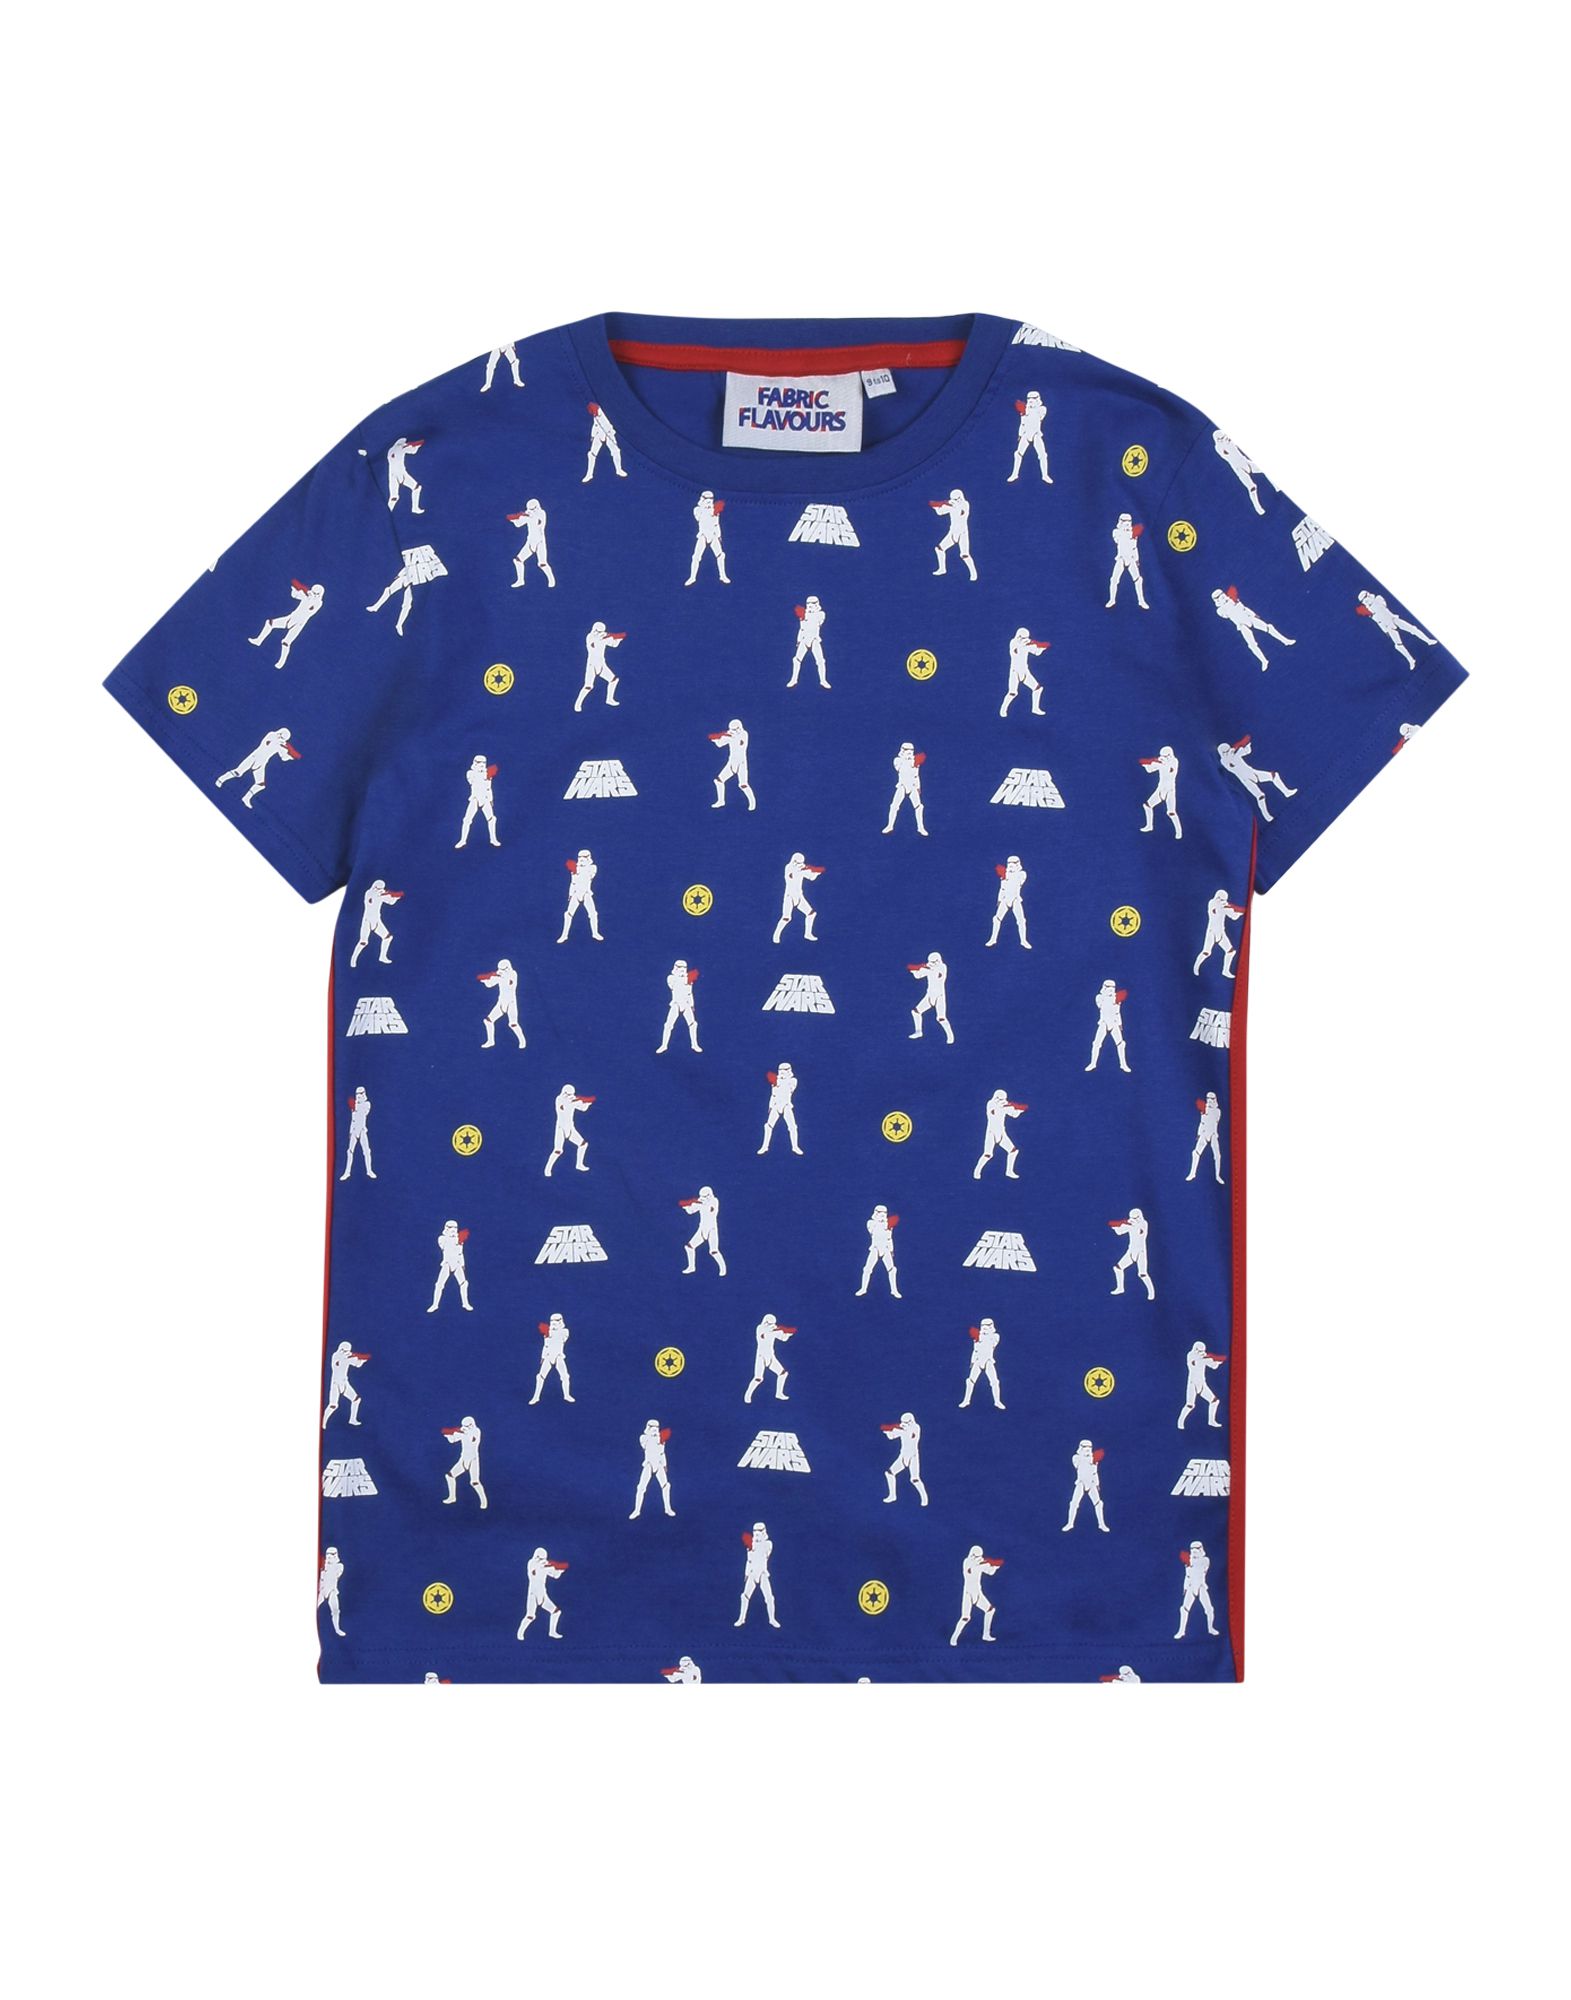 FABRIC FLAVOURS Stormtrooper Repeat Print Tee